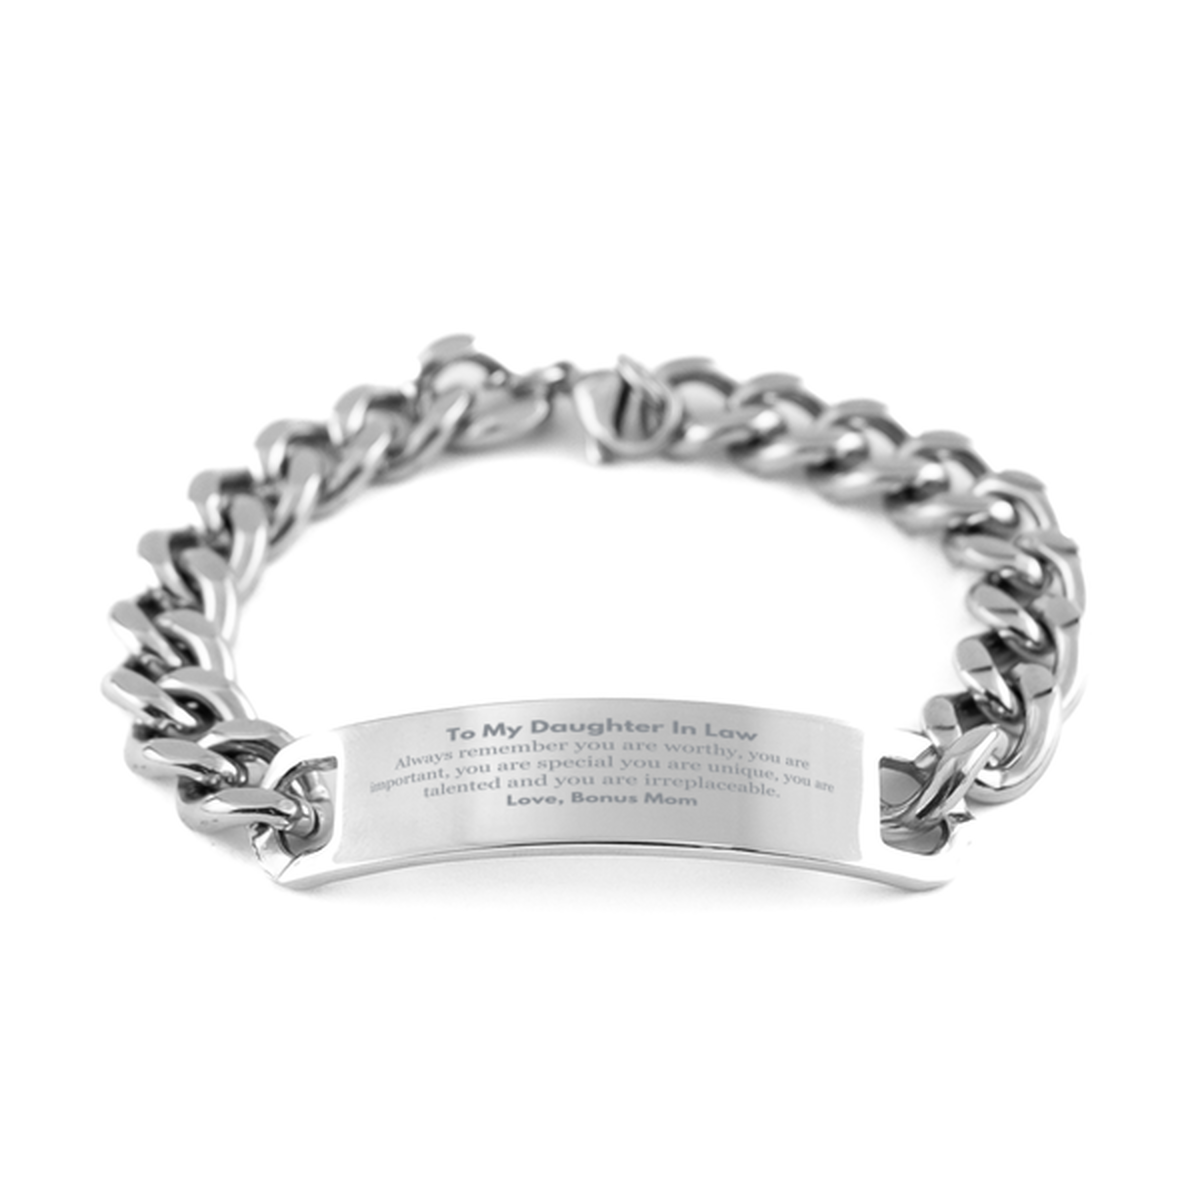 Daughter In Law Birthday Gifts from Bonus Mom, Inspirational Cuban Chain Stainless Steel Bracelet for Daughter In Law Christmas Graduation Gifts for Daughter In Law Always remember you are worthy, you are important. Love, Bonus Mom